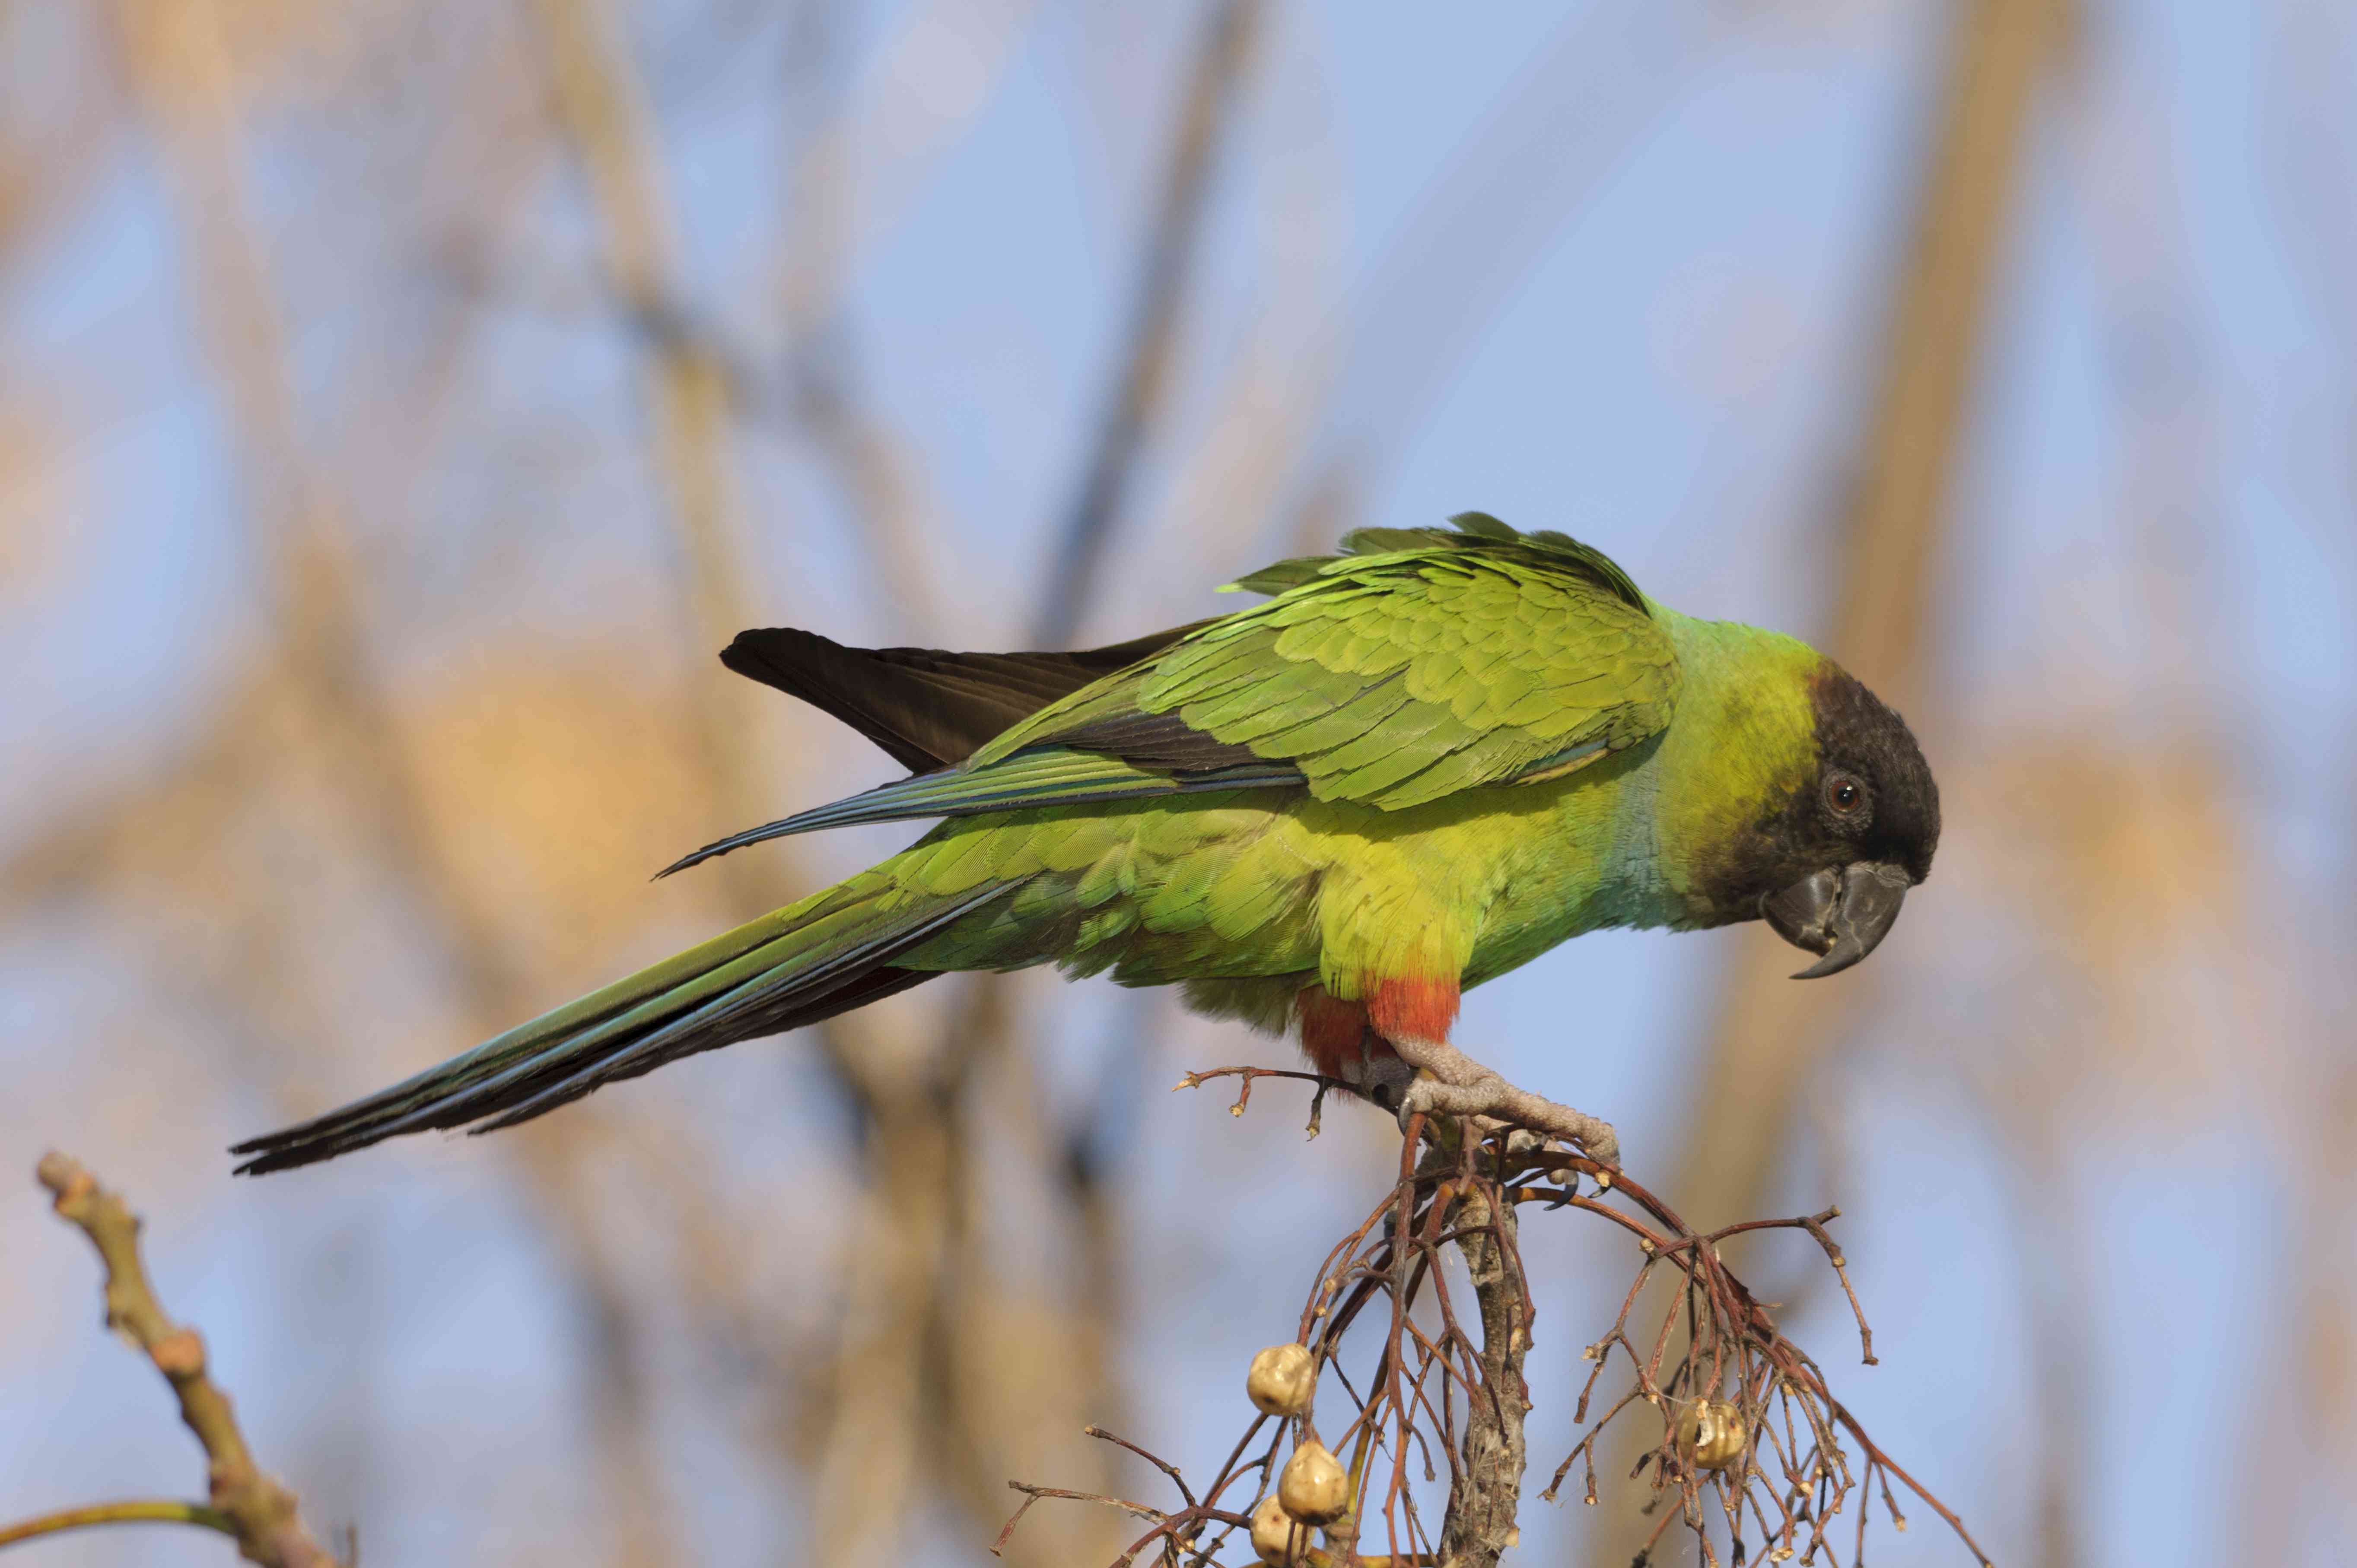 black-hooded parakeet (nanday conure) in a tree